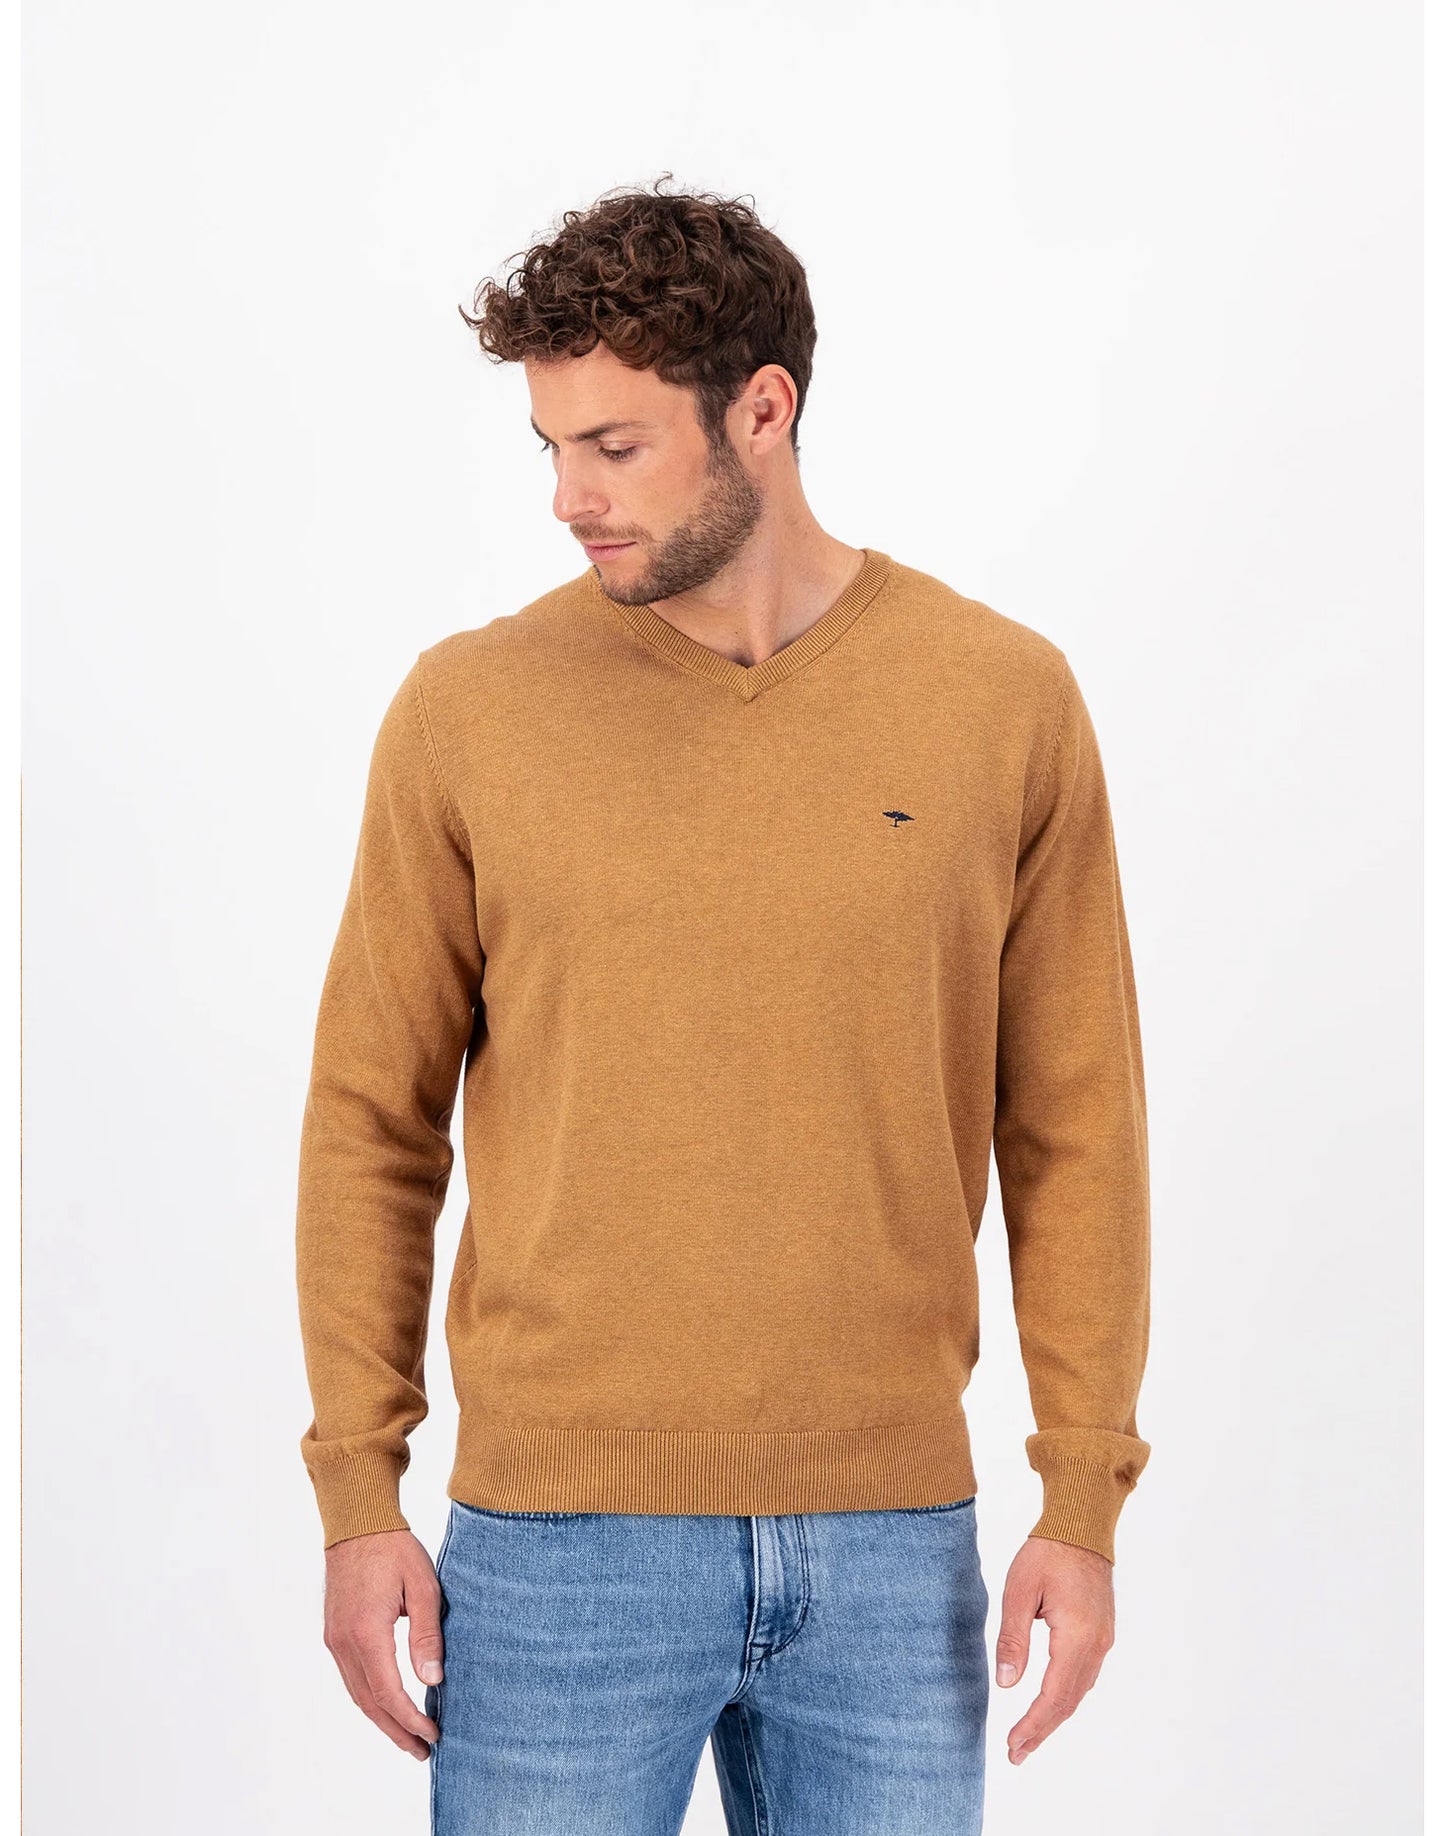 SOFT COTTON SWEATER WITH A V-NECK - Camel